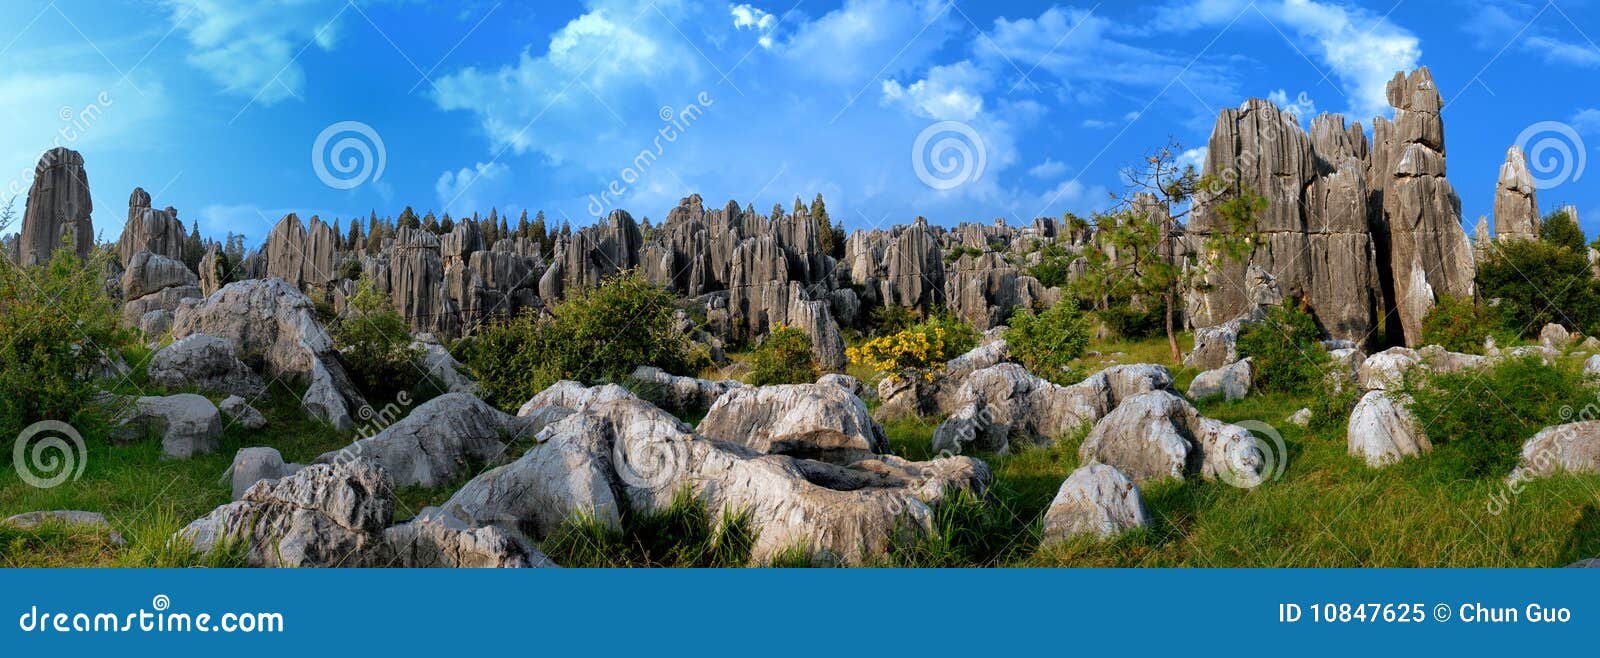 china stone forest